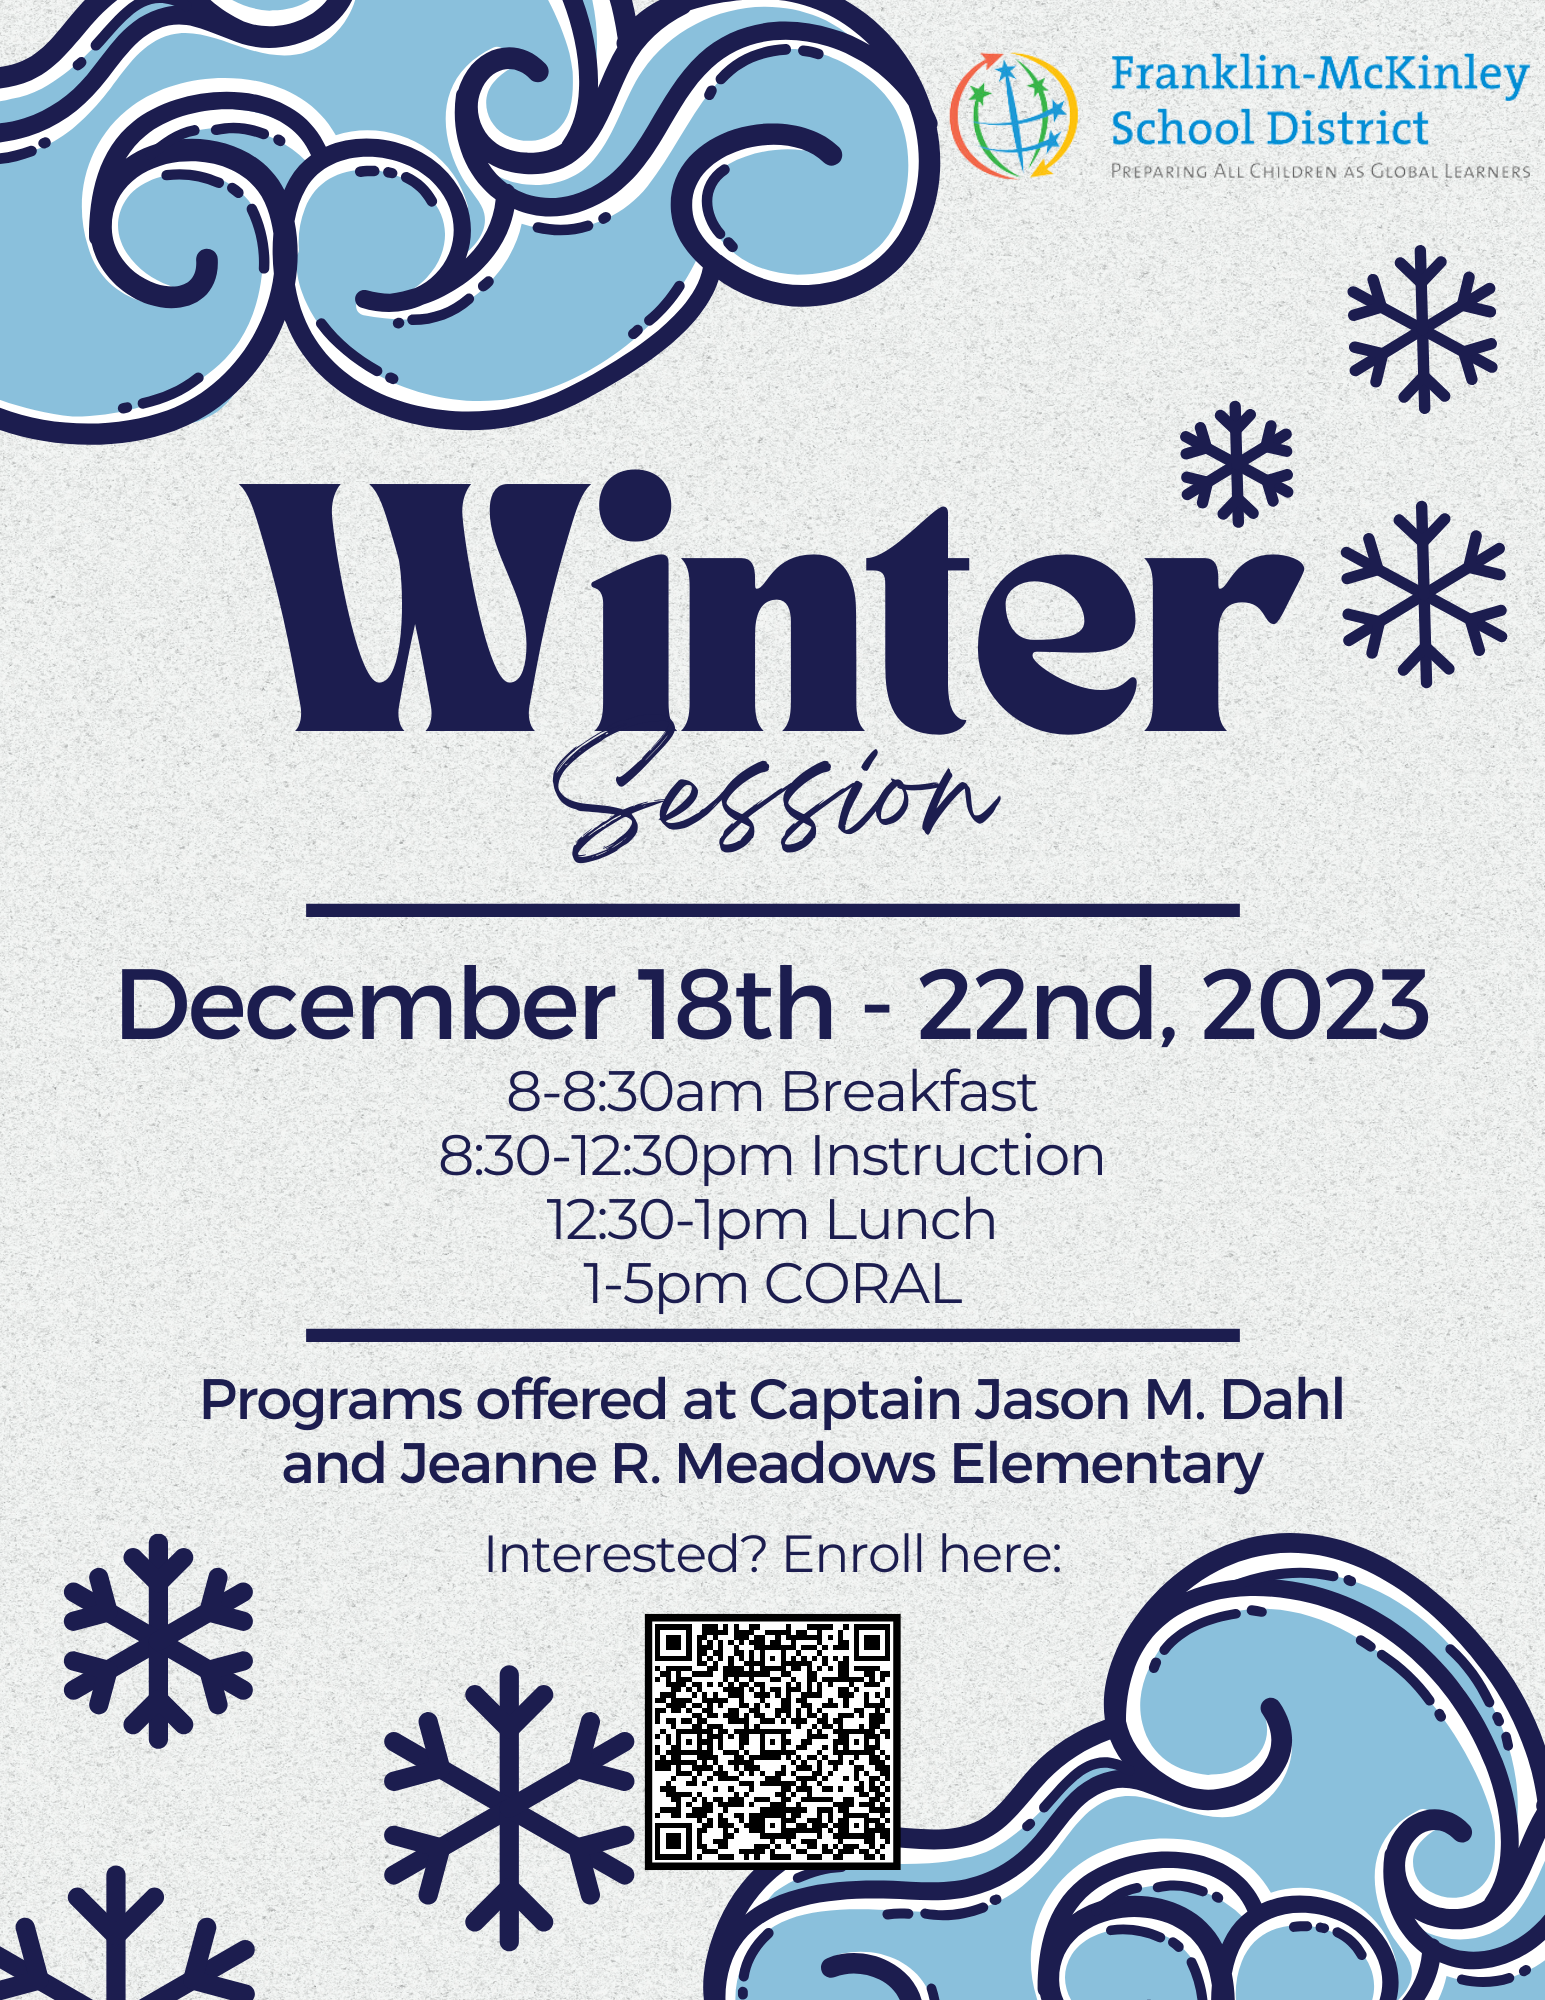 English Winter Session Flyer